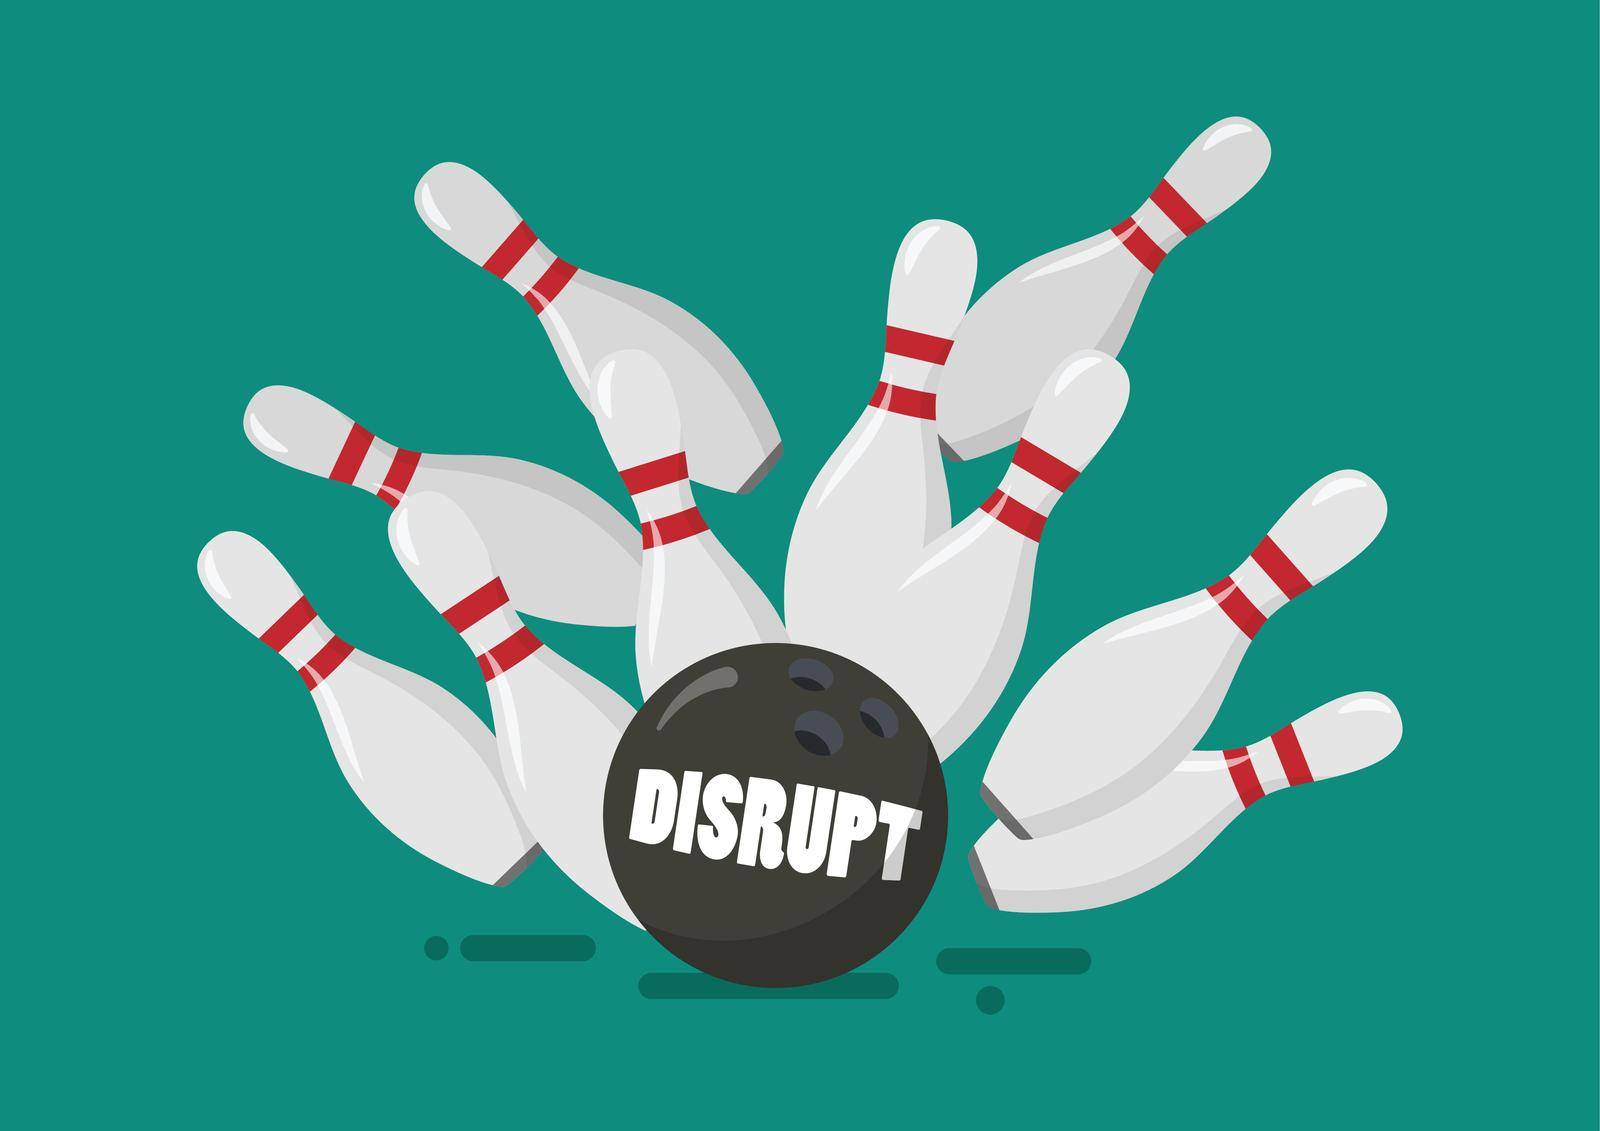 Disrupt bowling ball breaks bowling pins. Business disruption concept. Vector illustration